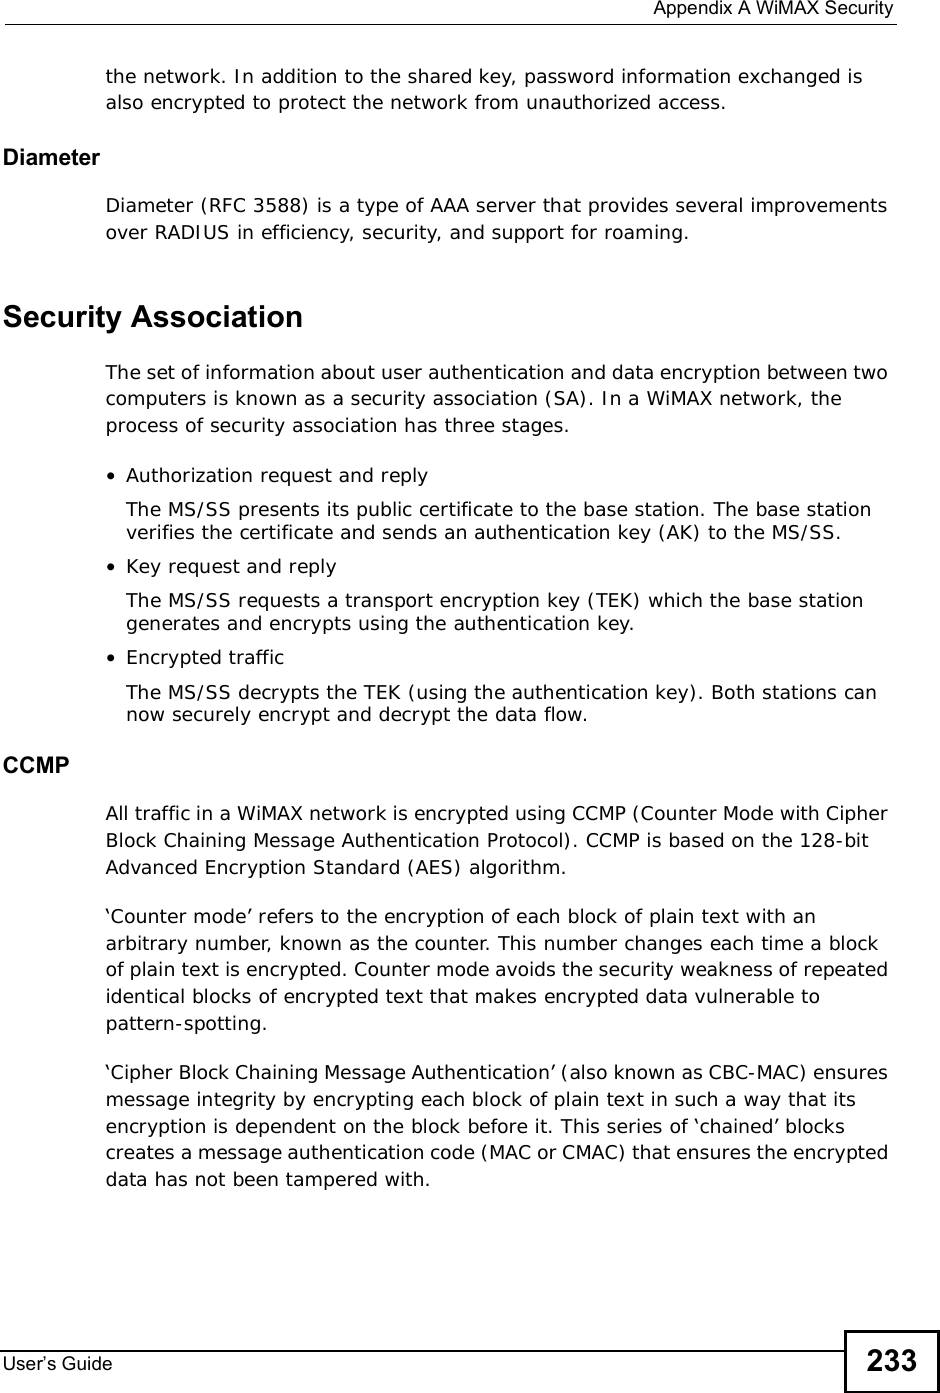  Appendix AWiMAX SecurityUser s Guide 233the network. In addition to the shared key, password information exchanged is also encrypted to protect the network from unauthorized access. DiameterDiameter (RFC 3588) is a type of AAA server that provides several improvements over RADIUS in efficiency, security, and support for roaming. Security AssociationThe set of information about user authentication and data encryption between two computers is known as a security association (SA). In a WiMAX network, the process of security association has three stages.•Authorization request and replyThe MS/SS presents its public certificate to the base station. The base station verifies the certificate and sends an authentication key (AK) to the MS/SS.•Key request and replyThe MS/SS requests a transport encryption key (TEK) which the base station generates and encrypts using the authentication key. •Encrypted trafficThe MS/SS decrypts the TEK (using the authentication key). Both stations can now securely encrypt and decrypt the data flow.CCMPAll traffic in a WiMAX network is encrypted using CCMP (Counter Mode with Cipher Block Chaining Message Authentication Protocol). CCMP is based on the 128-bit Advanced Encryption Standard (AES) algorithm. ‘Counter mode’ refers to the encryption of each block of plain text with an arbitrary number, known as the counter. This number changes each time a block of plain text is encrypted. Counter mode avoids the security weakness of repeated identical blocks of encrypted text that makes encrypted data vulnerable to pattern-spotting.‘Cipher Block Chaining Message Authentication’ (also known as CBC-MAC) ensures message integrity by encrypting each block of plain text in such a way that its encryption is dependent on the block before it. This series of ‘chained’ blocks creates a message authentication code (MAC or CMAC) that ensures the encrypted data has not been tampered with.